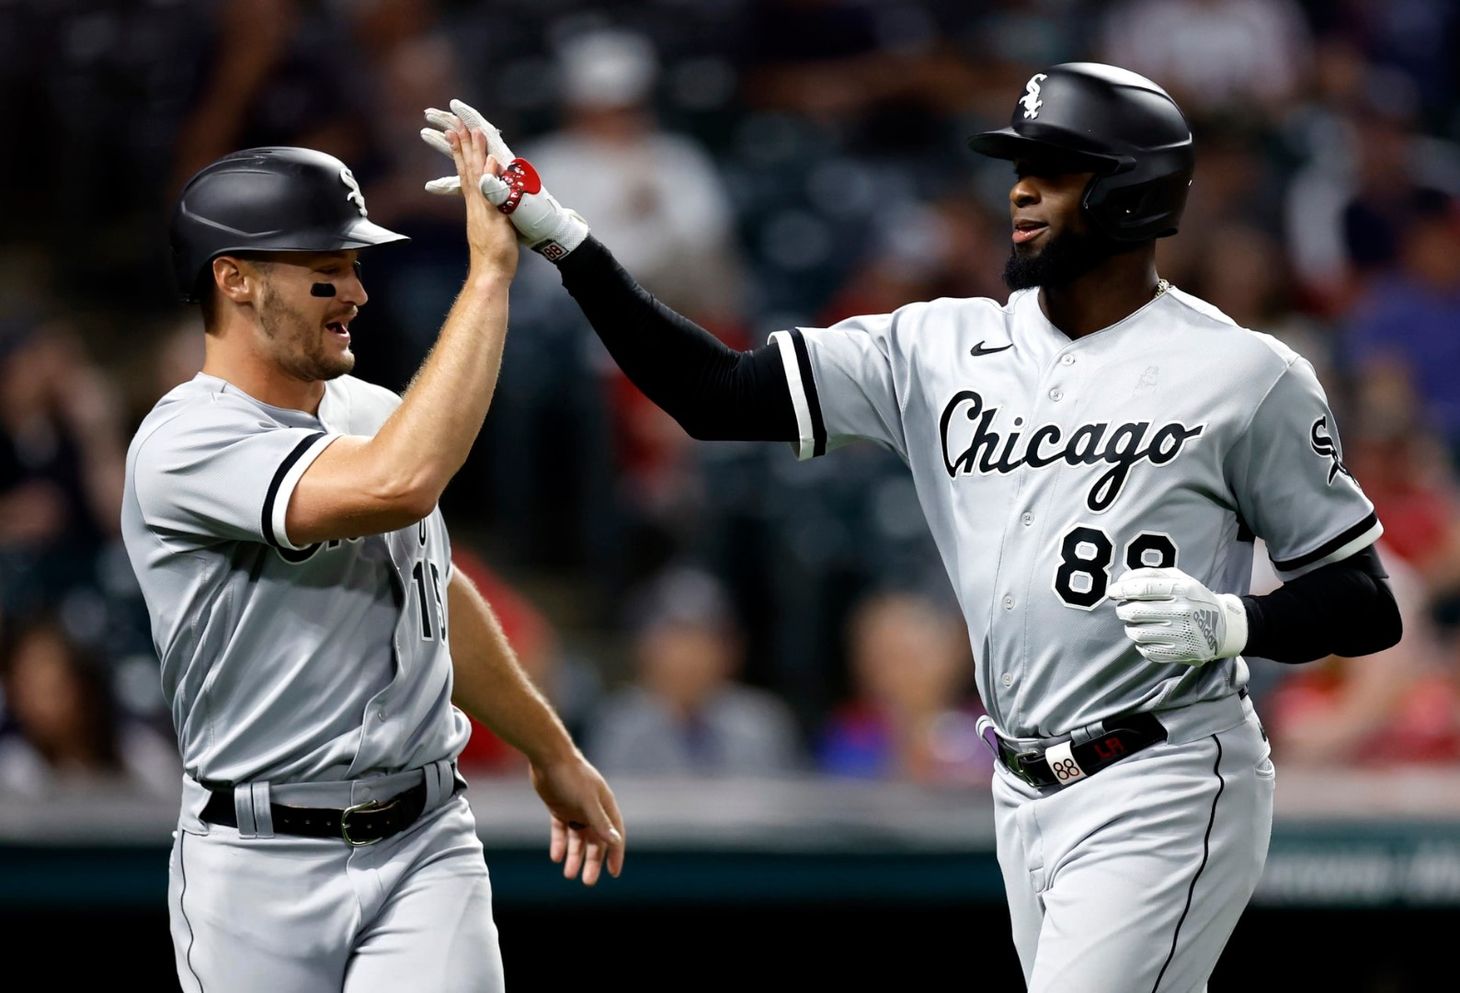 Cease strikes out nine, White Sox split DH with Guardians